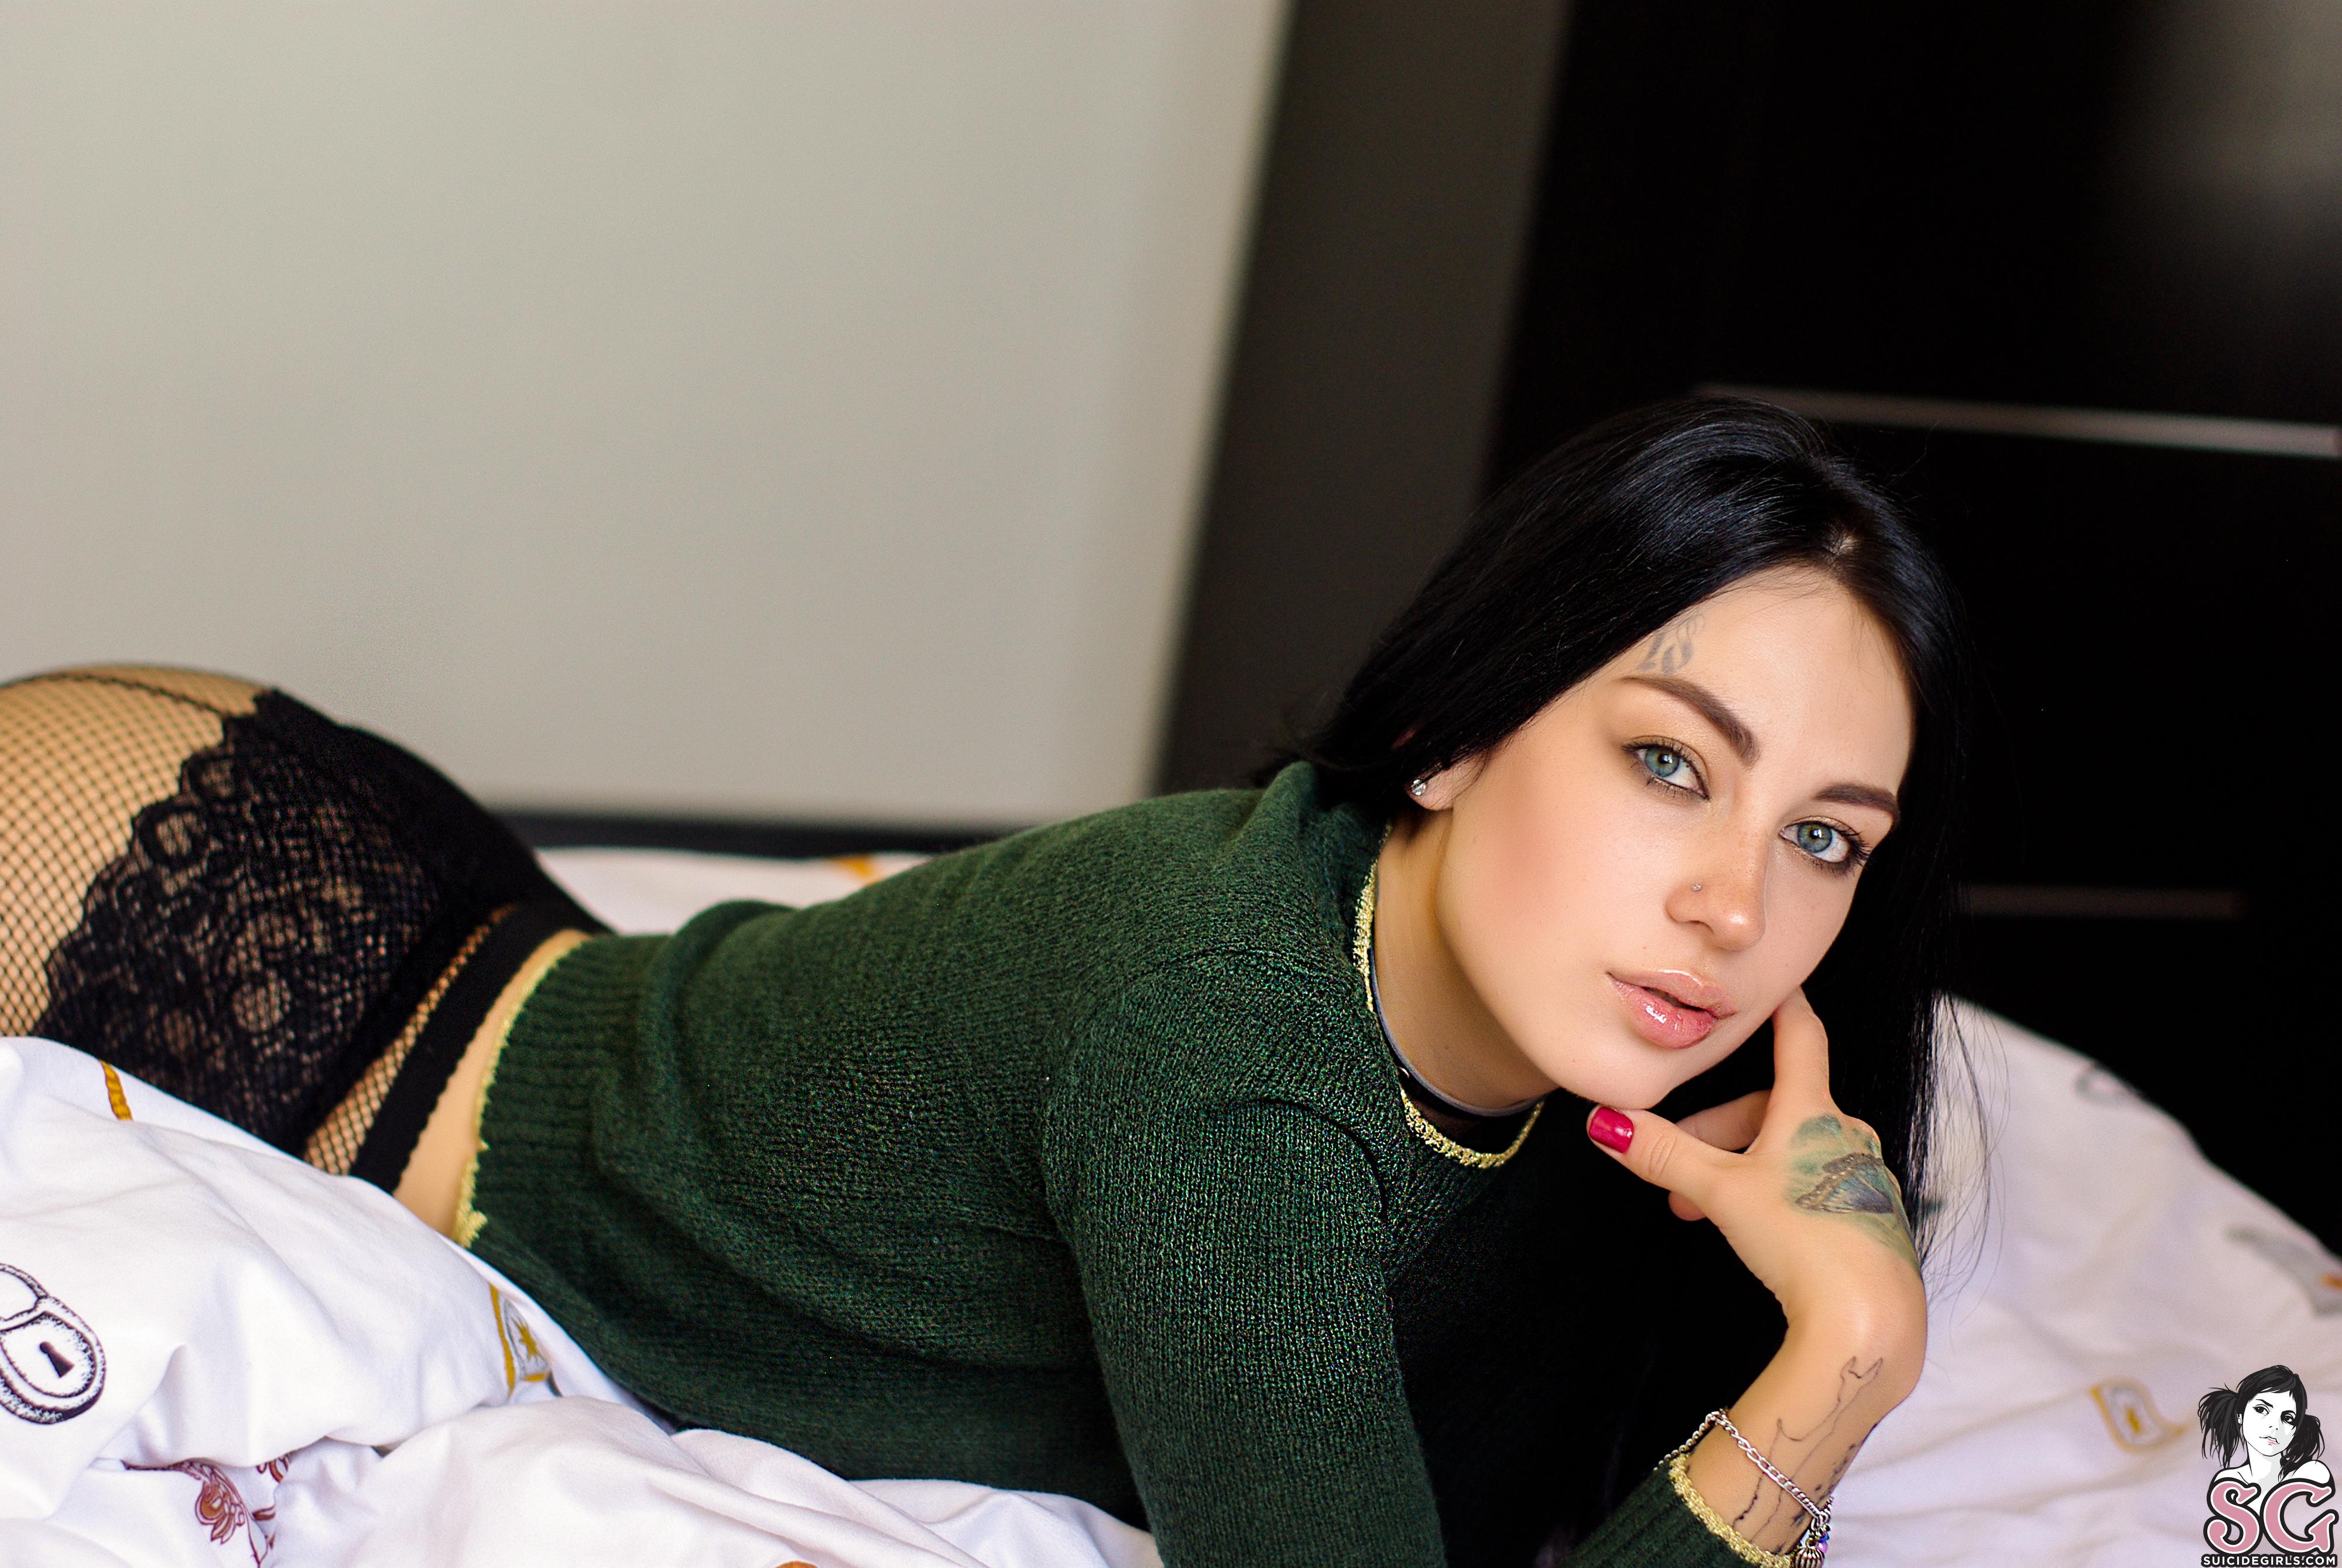 People 4000x2678 Anastasia Foggy Suicide Girls tattoo women model ass in bed black hair green eyes